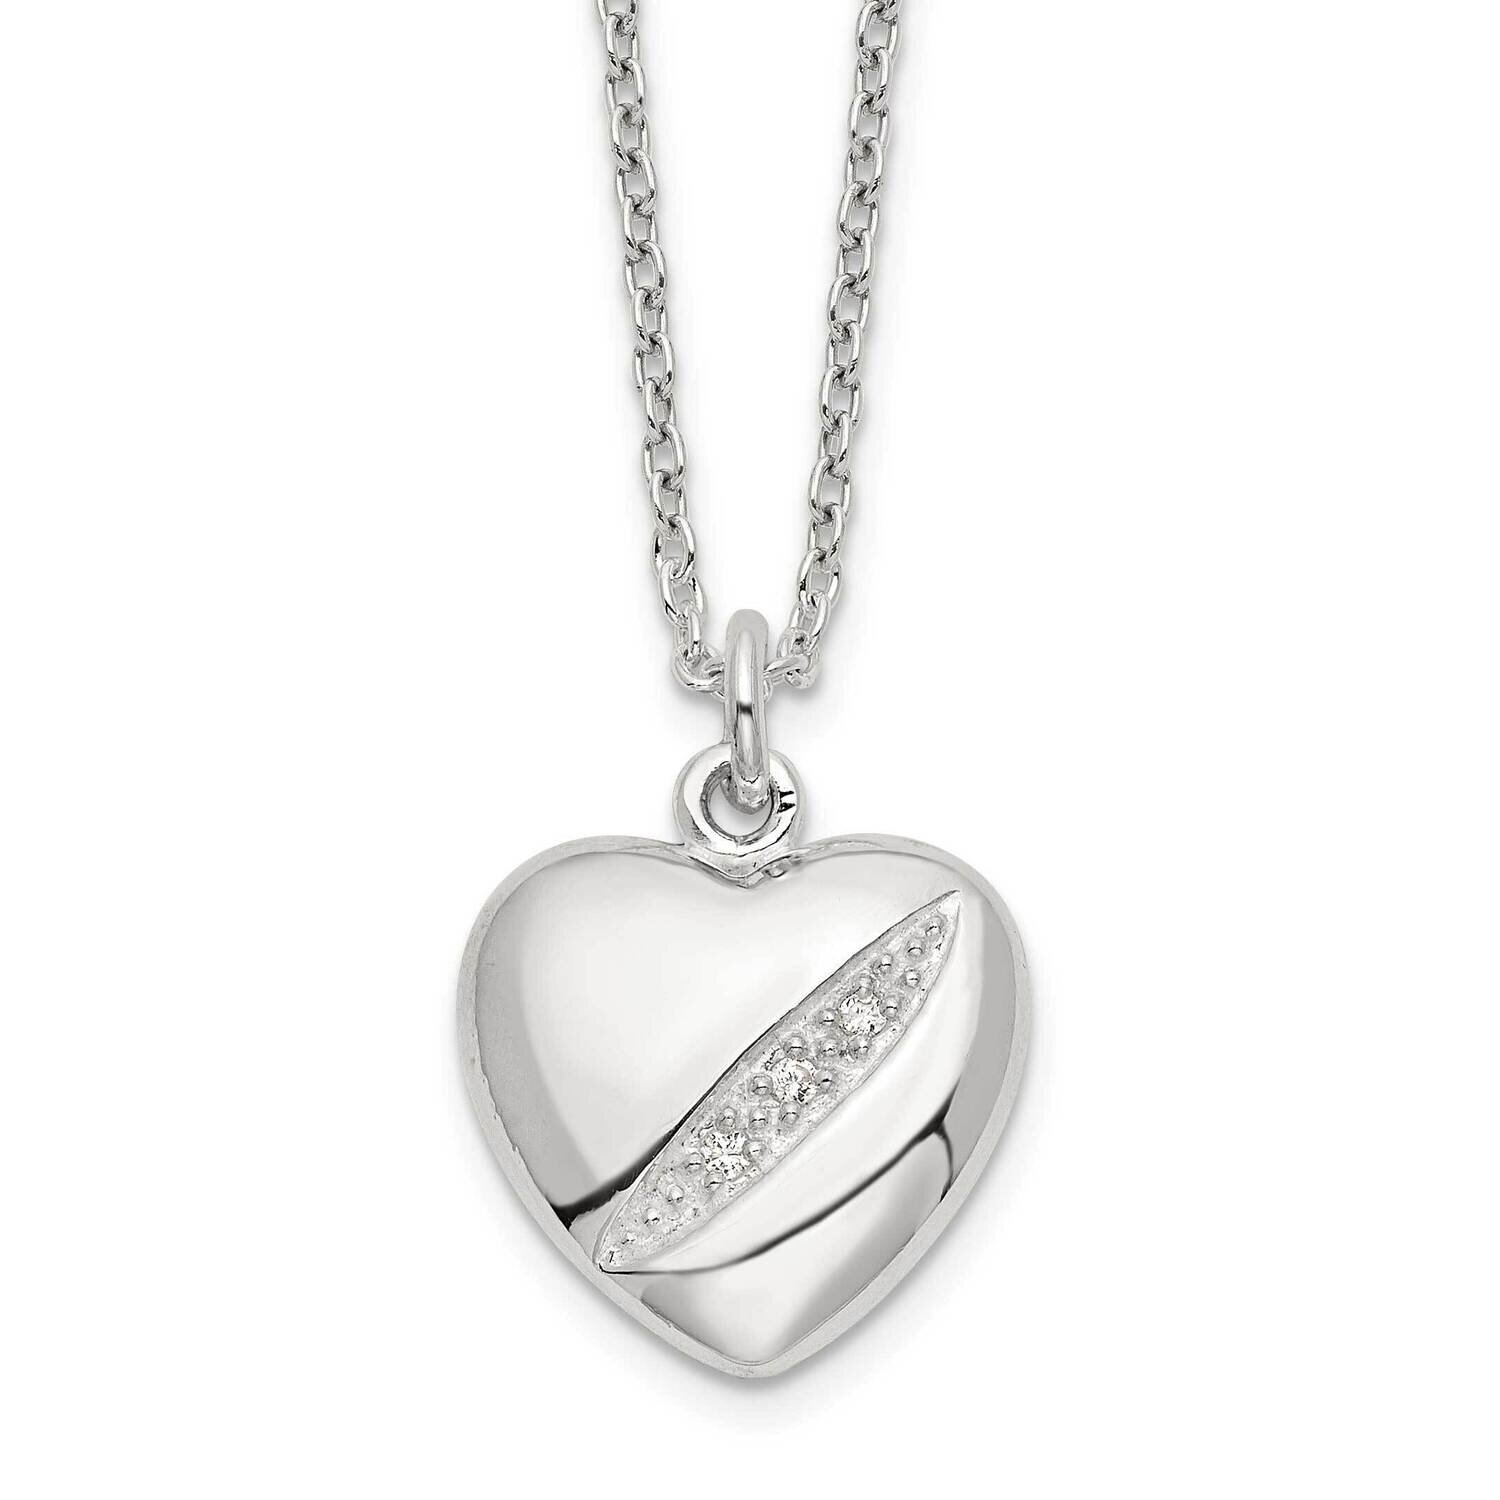 16 Inch with 2 Inch Extender Heart Necklace 16 Inch Sterling Silver Cz Diamond QG6084-16